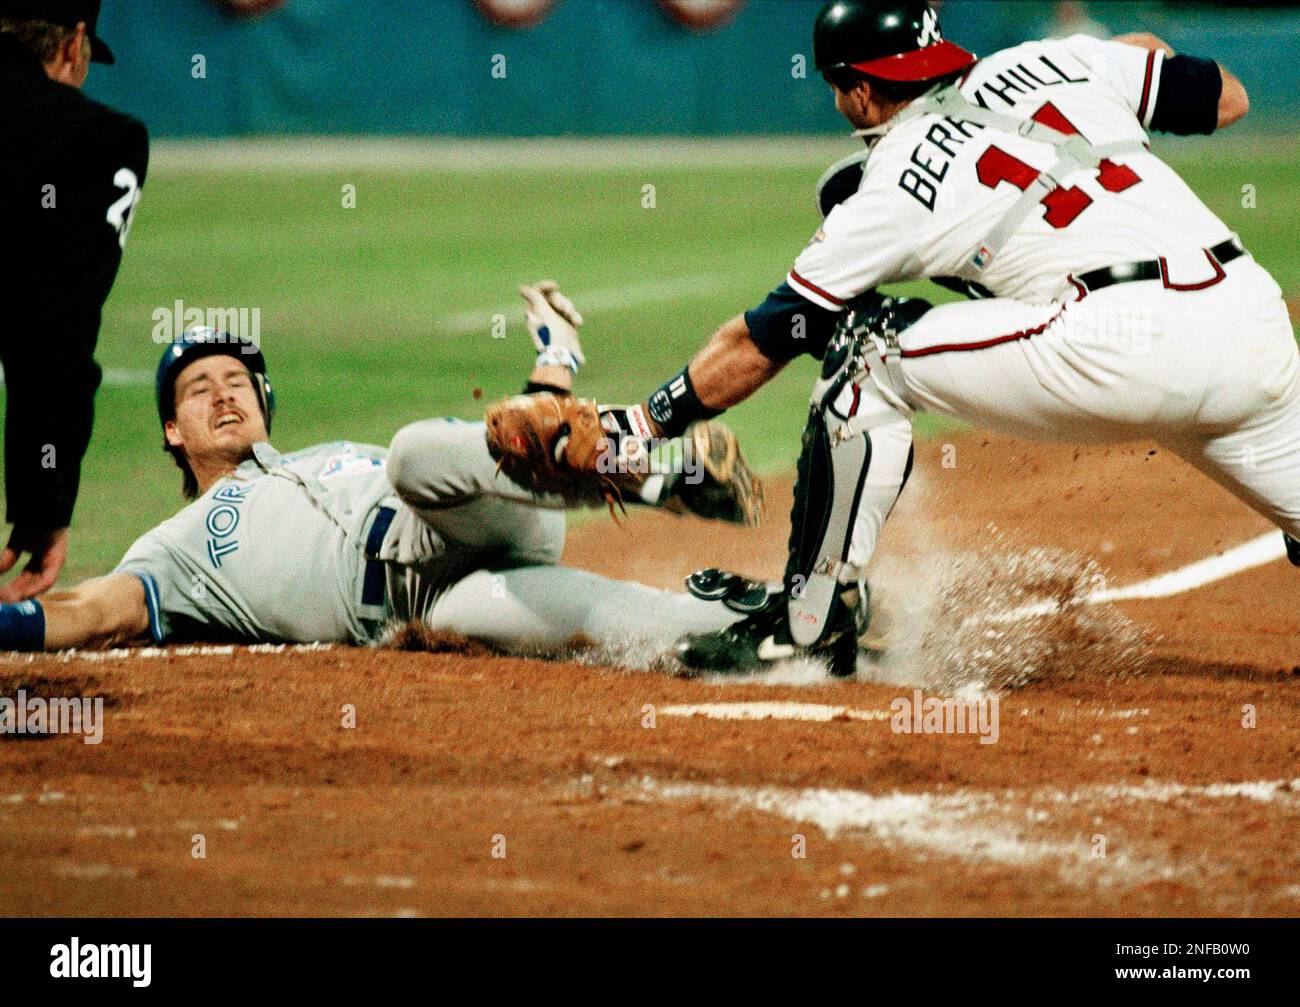 Toronto Blue Jay Pat Borders is tagged out at the plate in the